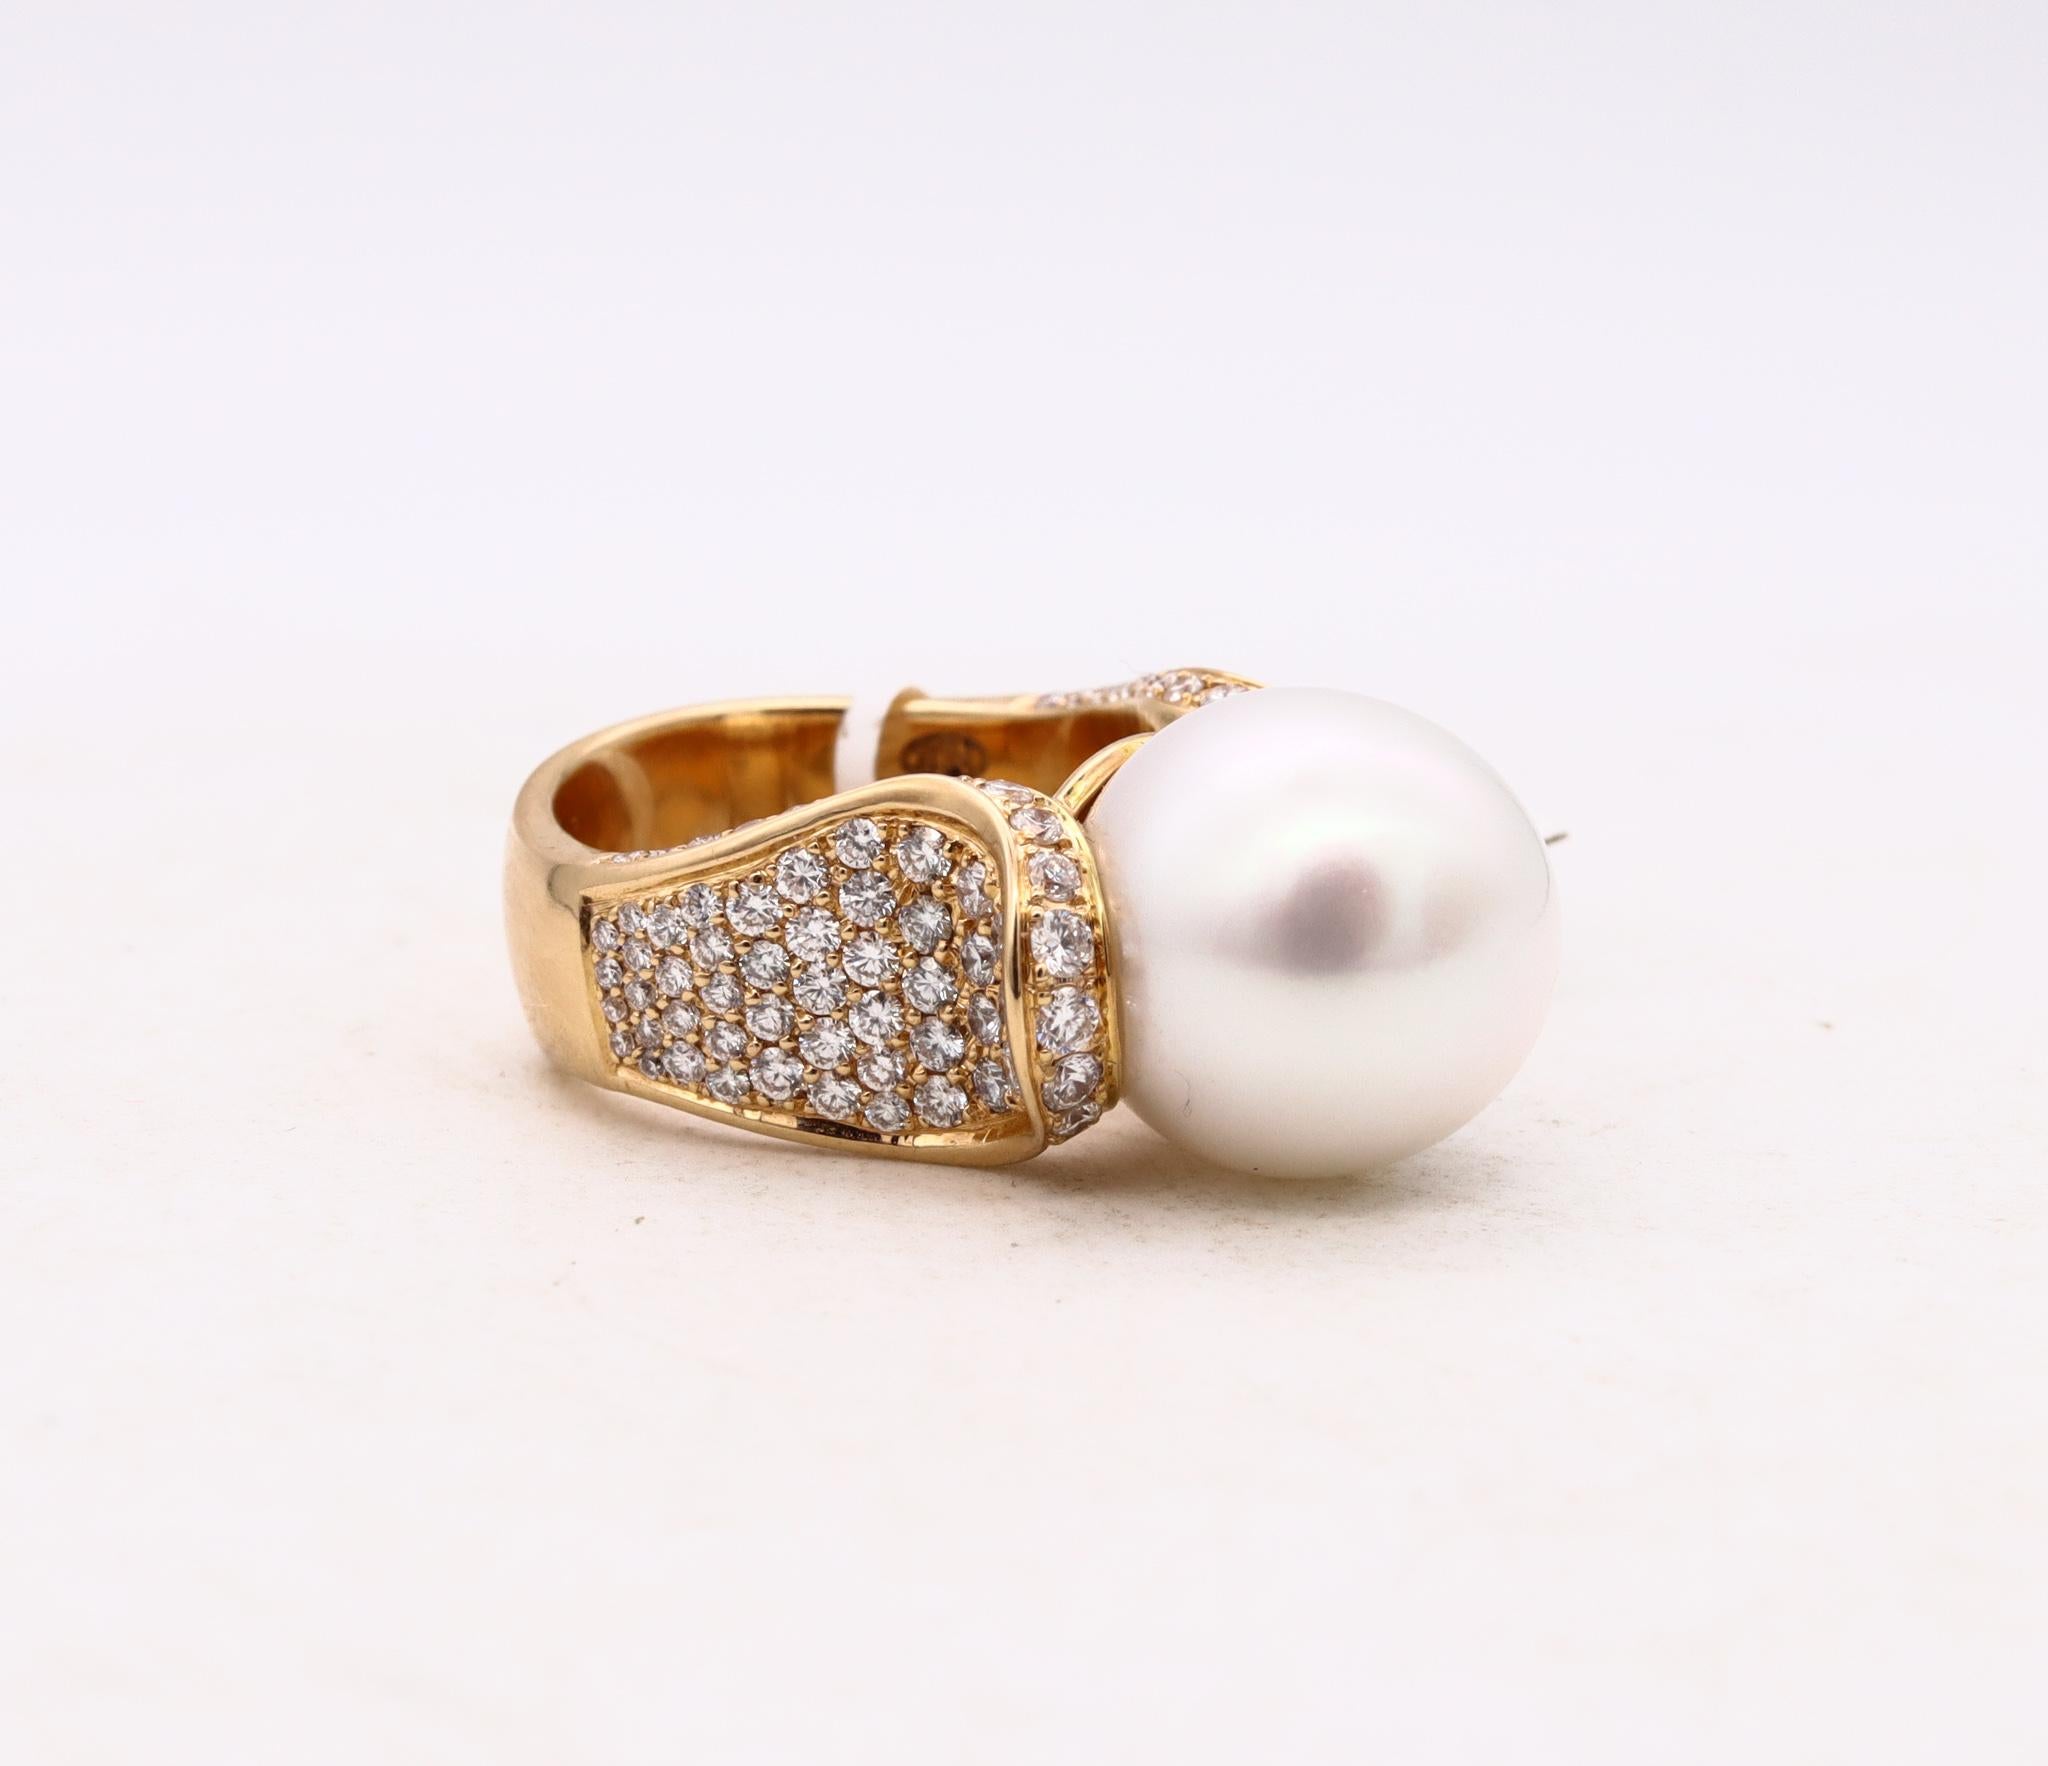 Hans D Krieger Ring 18kt Gold with 1.67 Cts Diamonds and White Pearl 1